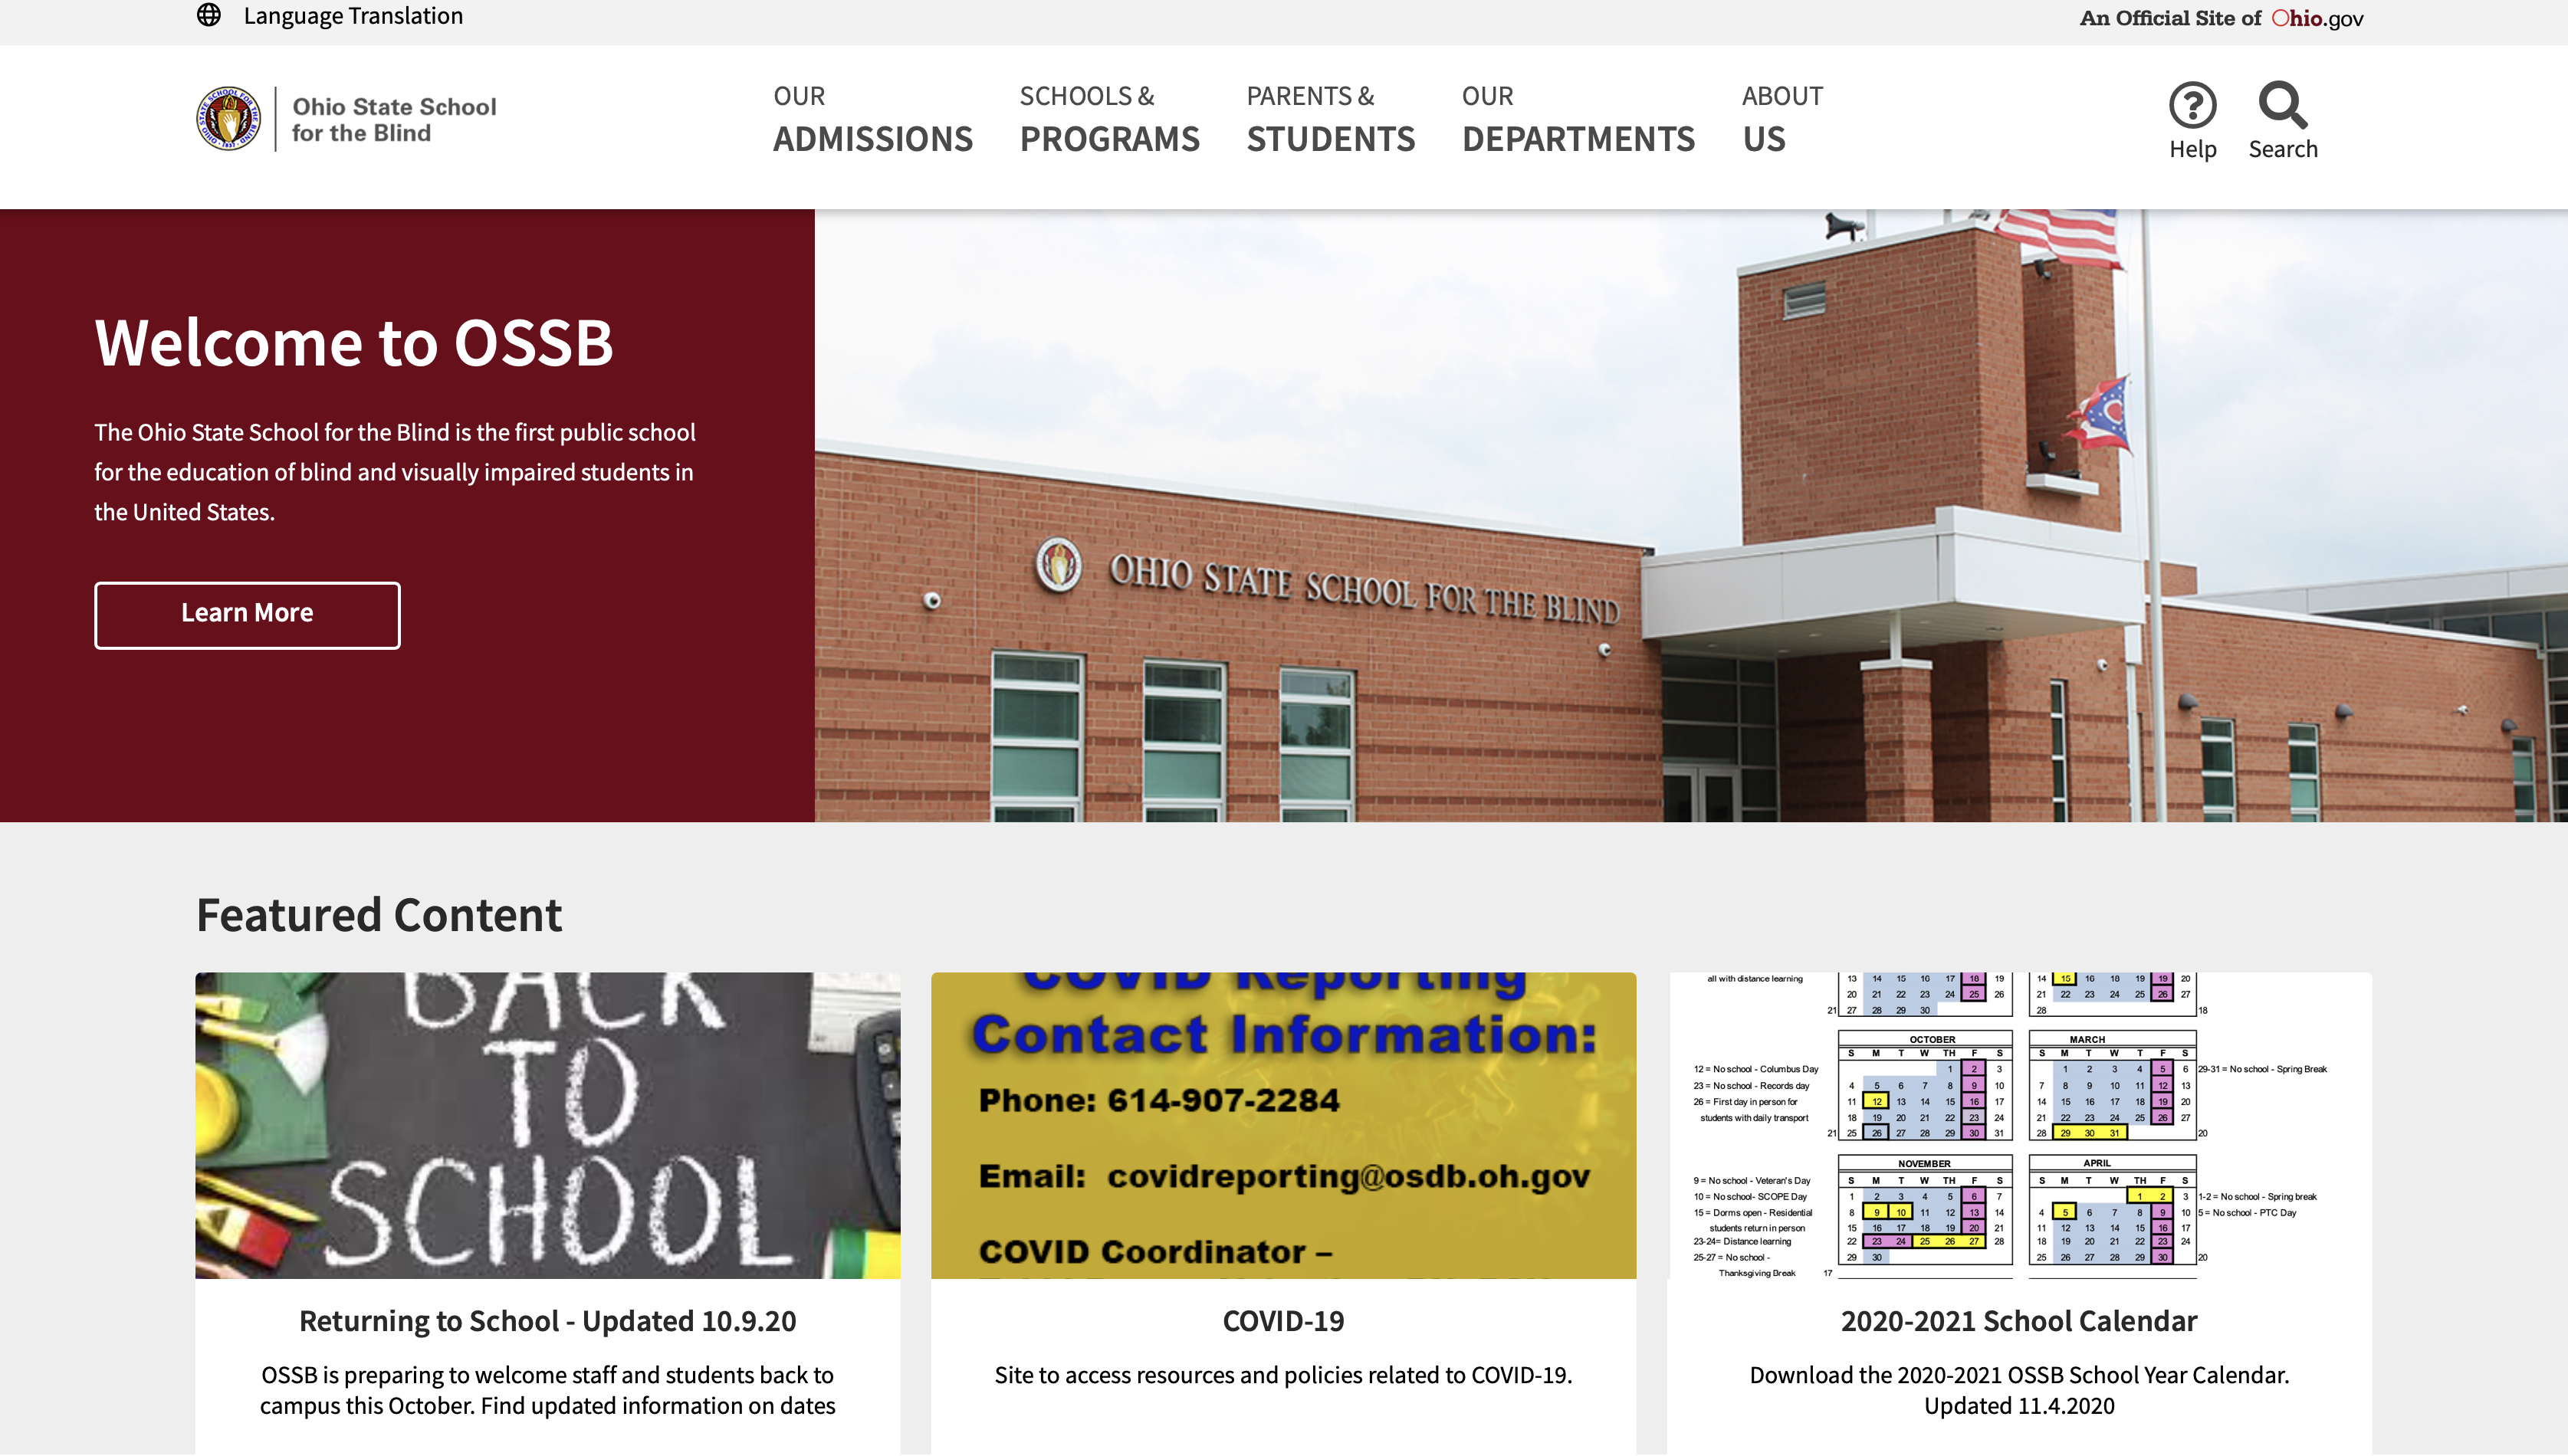 Ohio State School for the Blind webpage screenshot